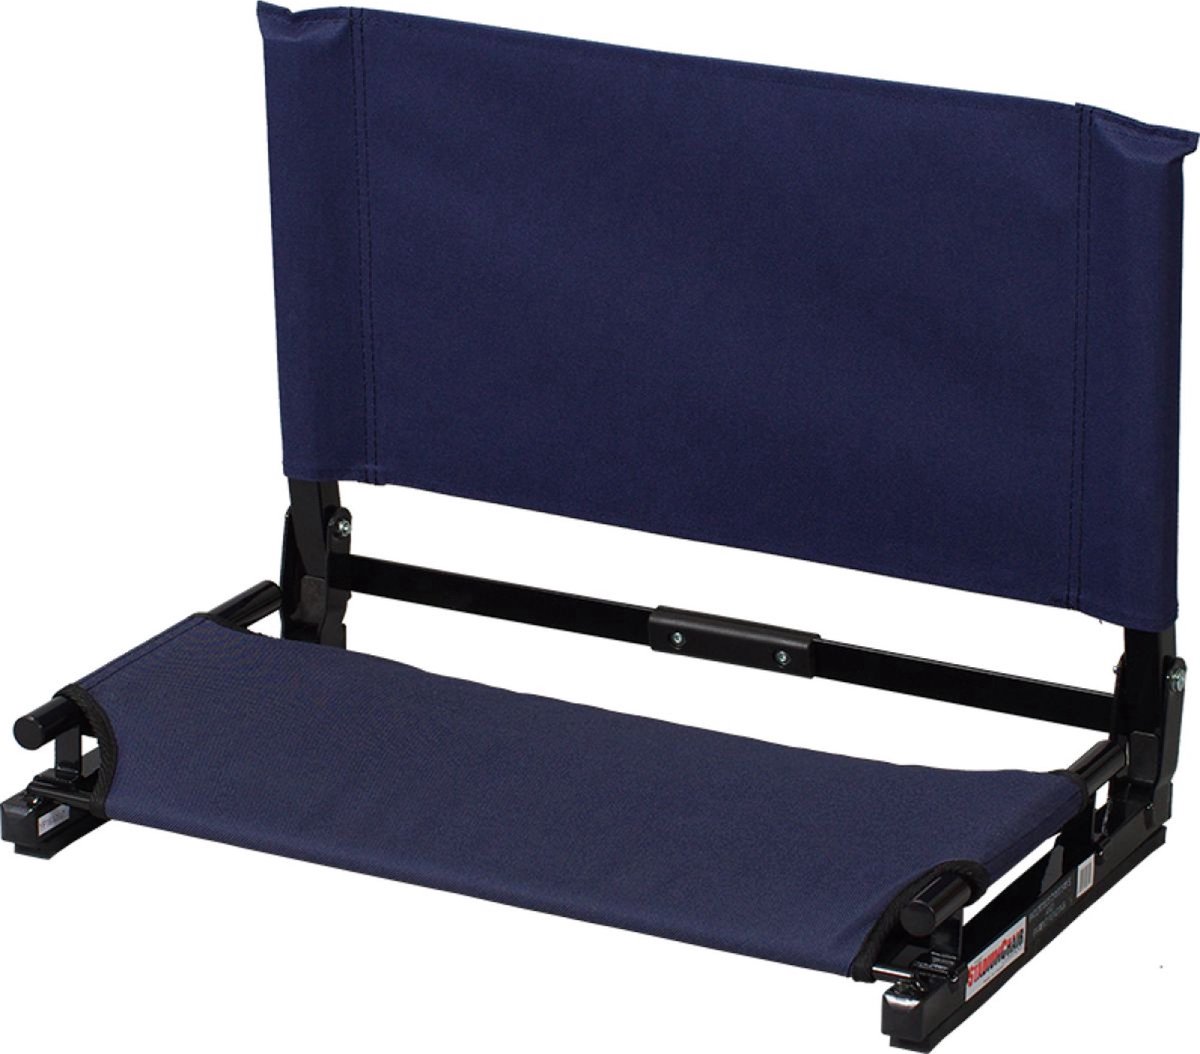 Stadium Chair SC2W-COMPLETE The Gamechanger DeLux Color Navy